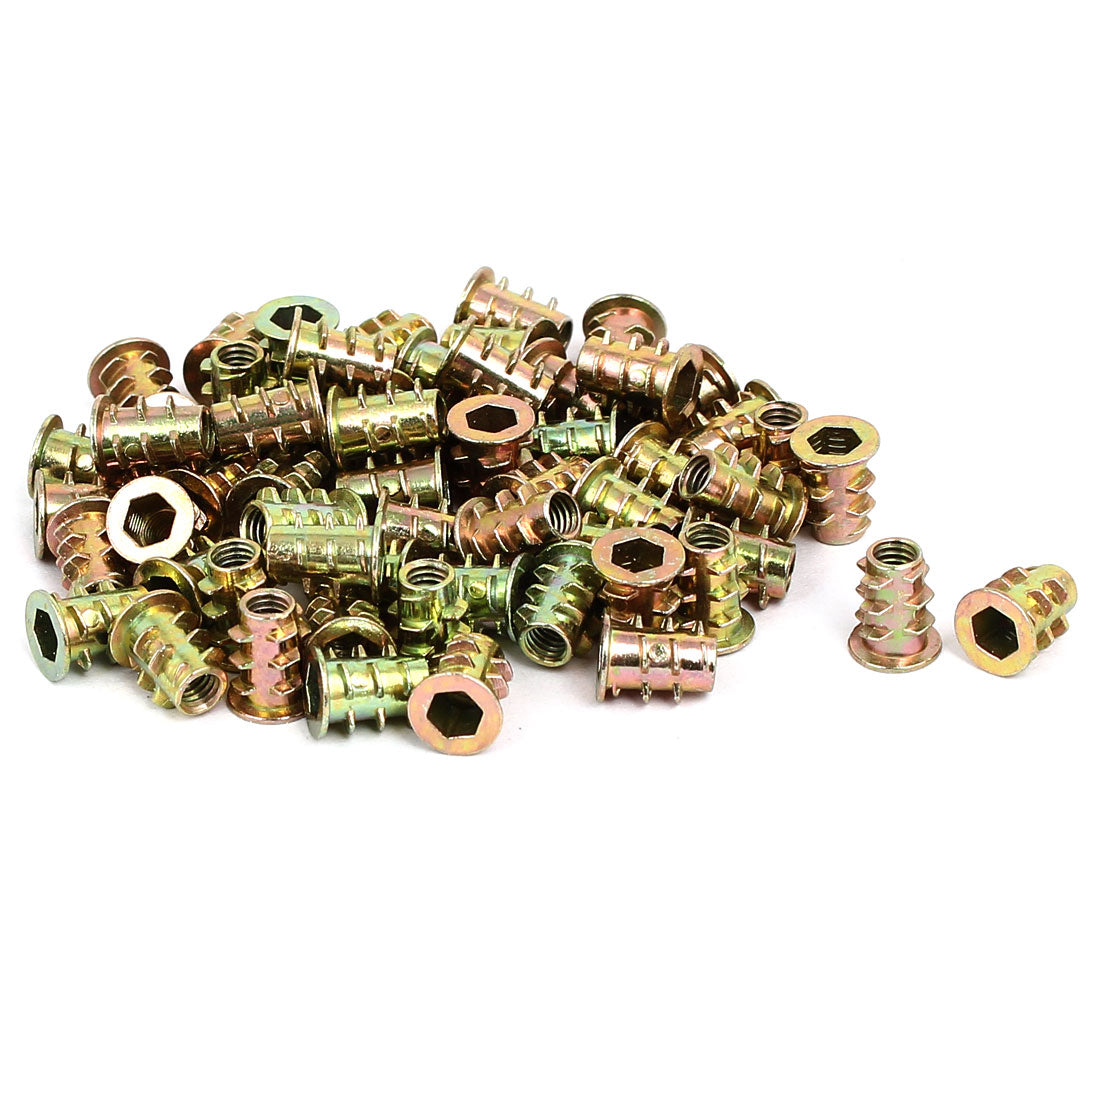 uxcell Uxcell M4x10mm Interface Hex Socket Threaded Insert Nuts 60pcs for Wood Furniture